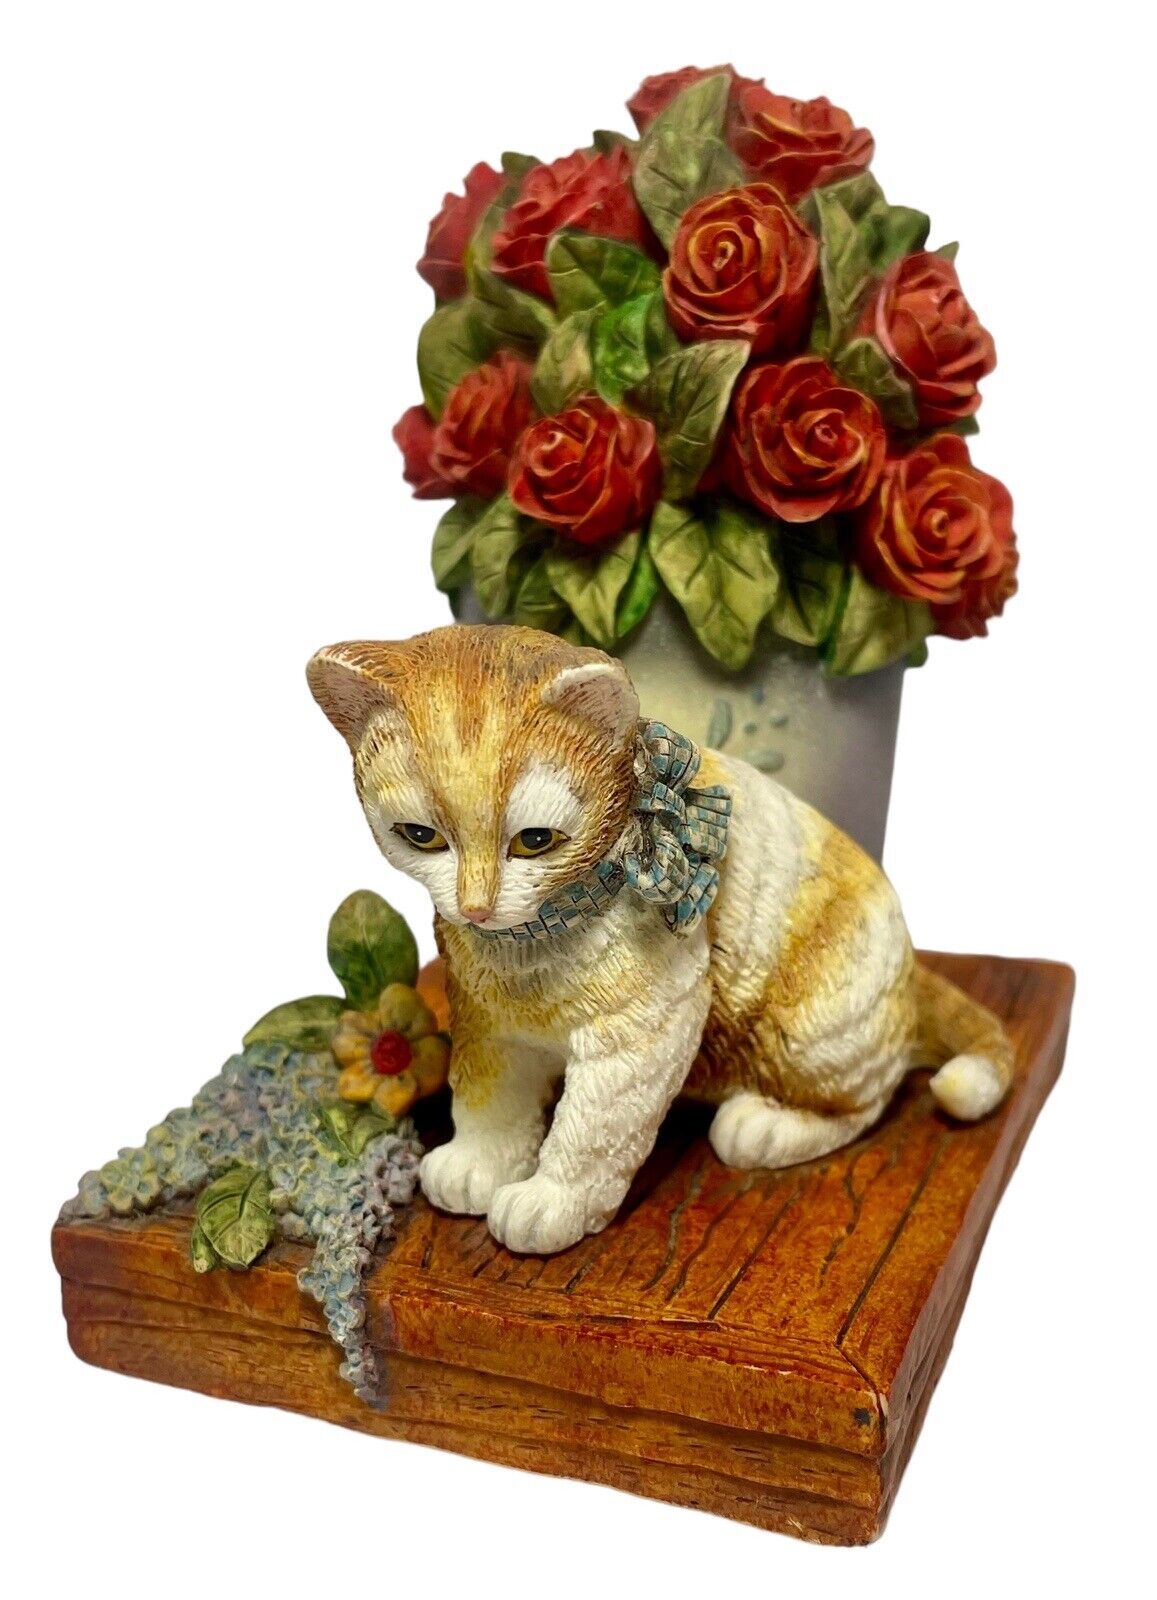 Sweet Thoughts 1st Edition 1999 Susan Winget Cat & Roses Figurine Lang & Wise